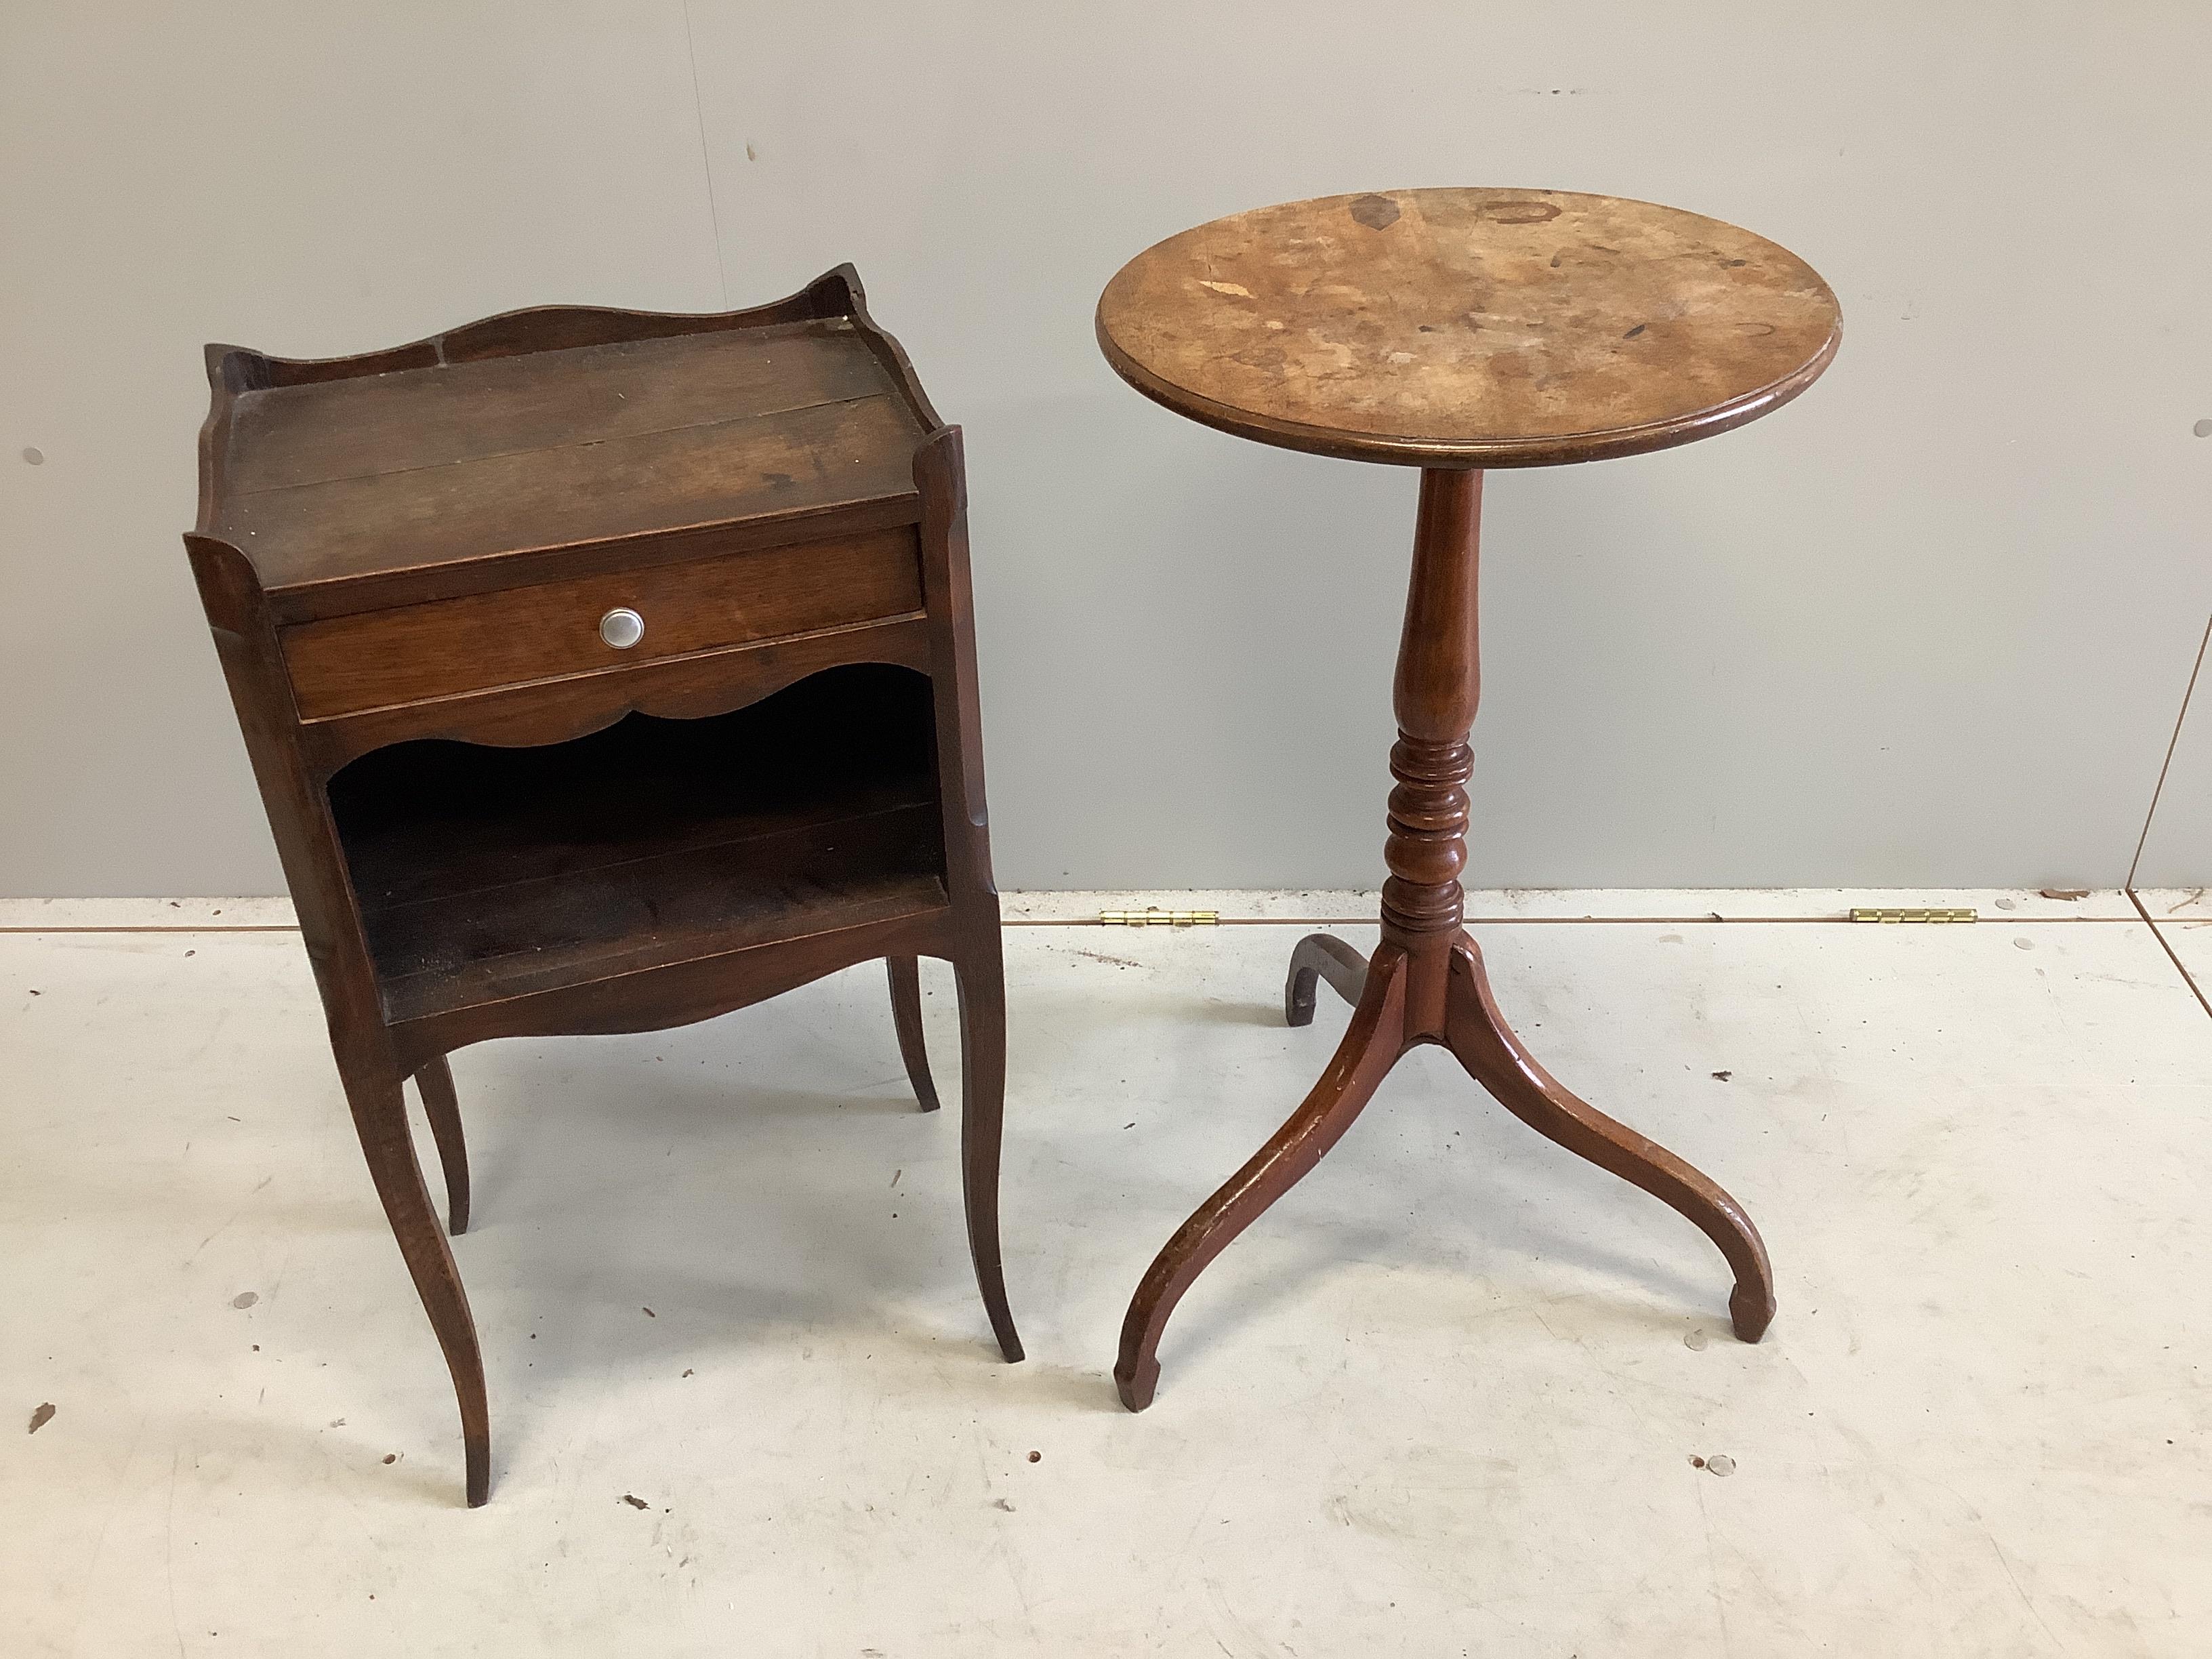 A 19th century French mahogany bedside table, width 38cm, depth 28cm, height 70cm together with a Regency circular mahogany tripod wine table